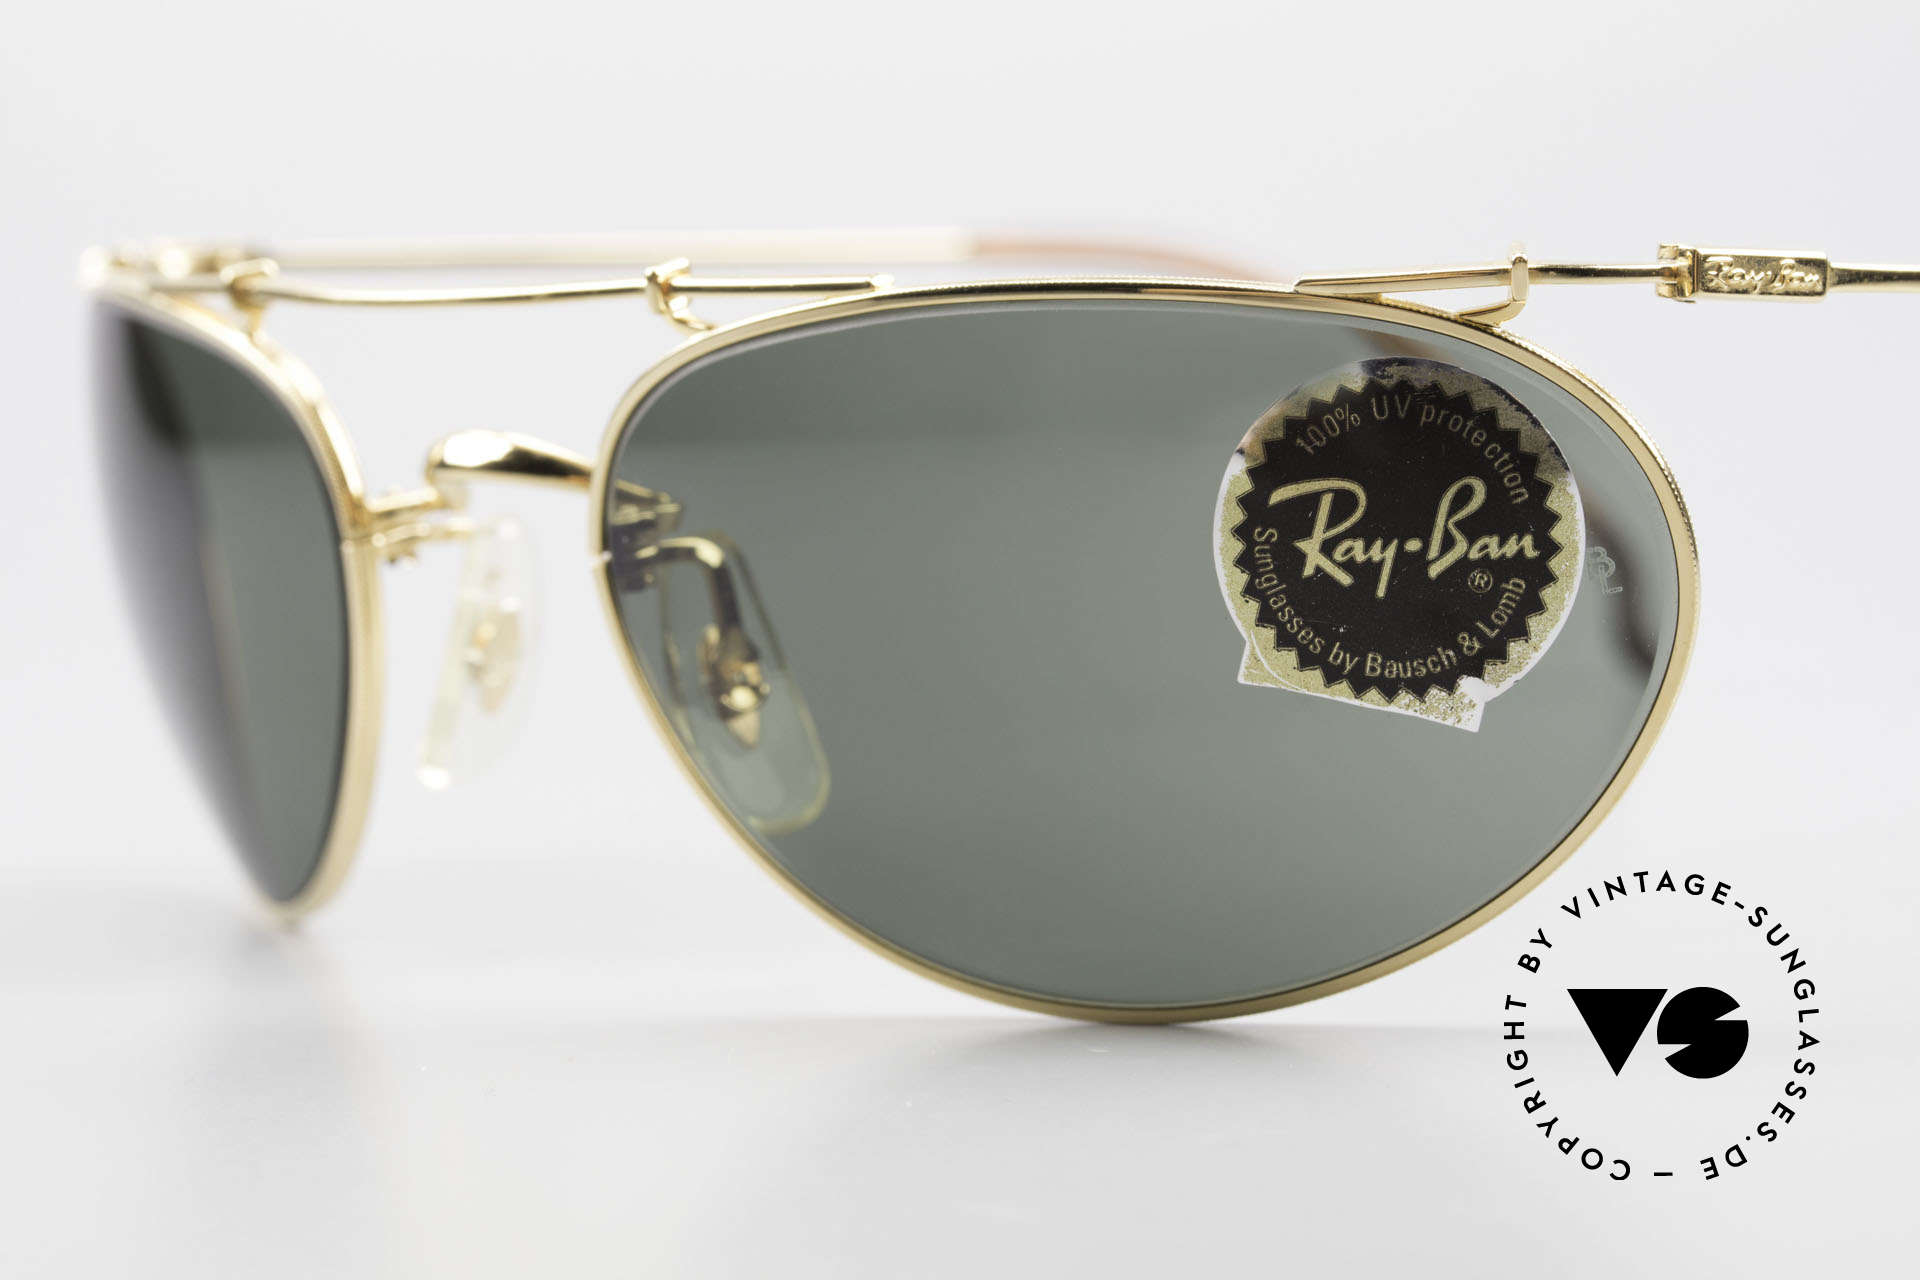 Sunglasses Ray Ban Deco Metals Wrap Old Bausch Lomb Ray-Ban USA